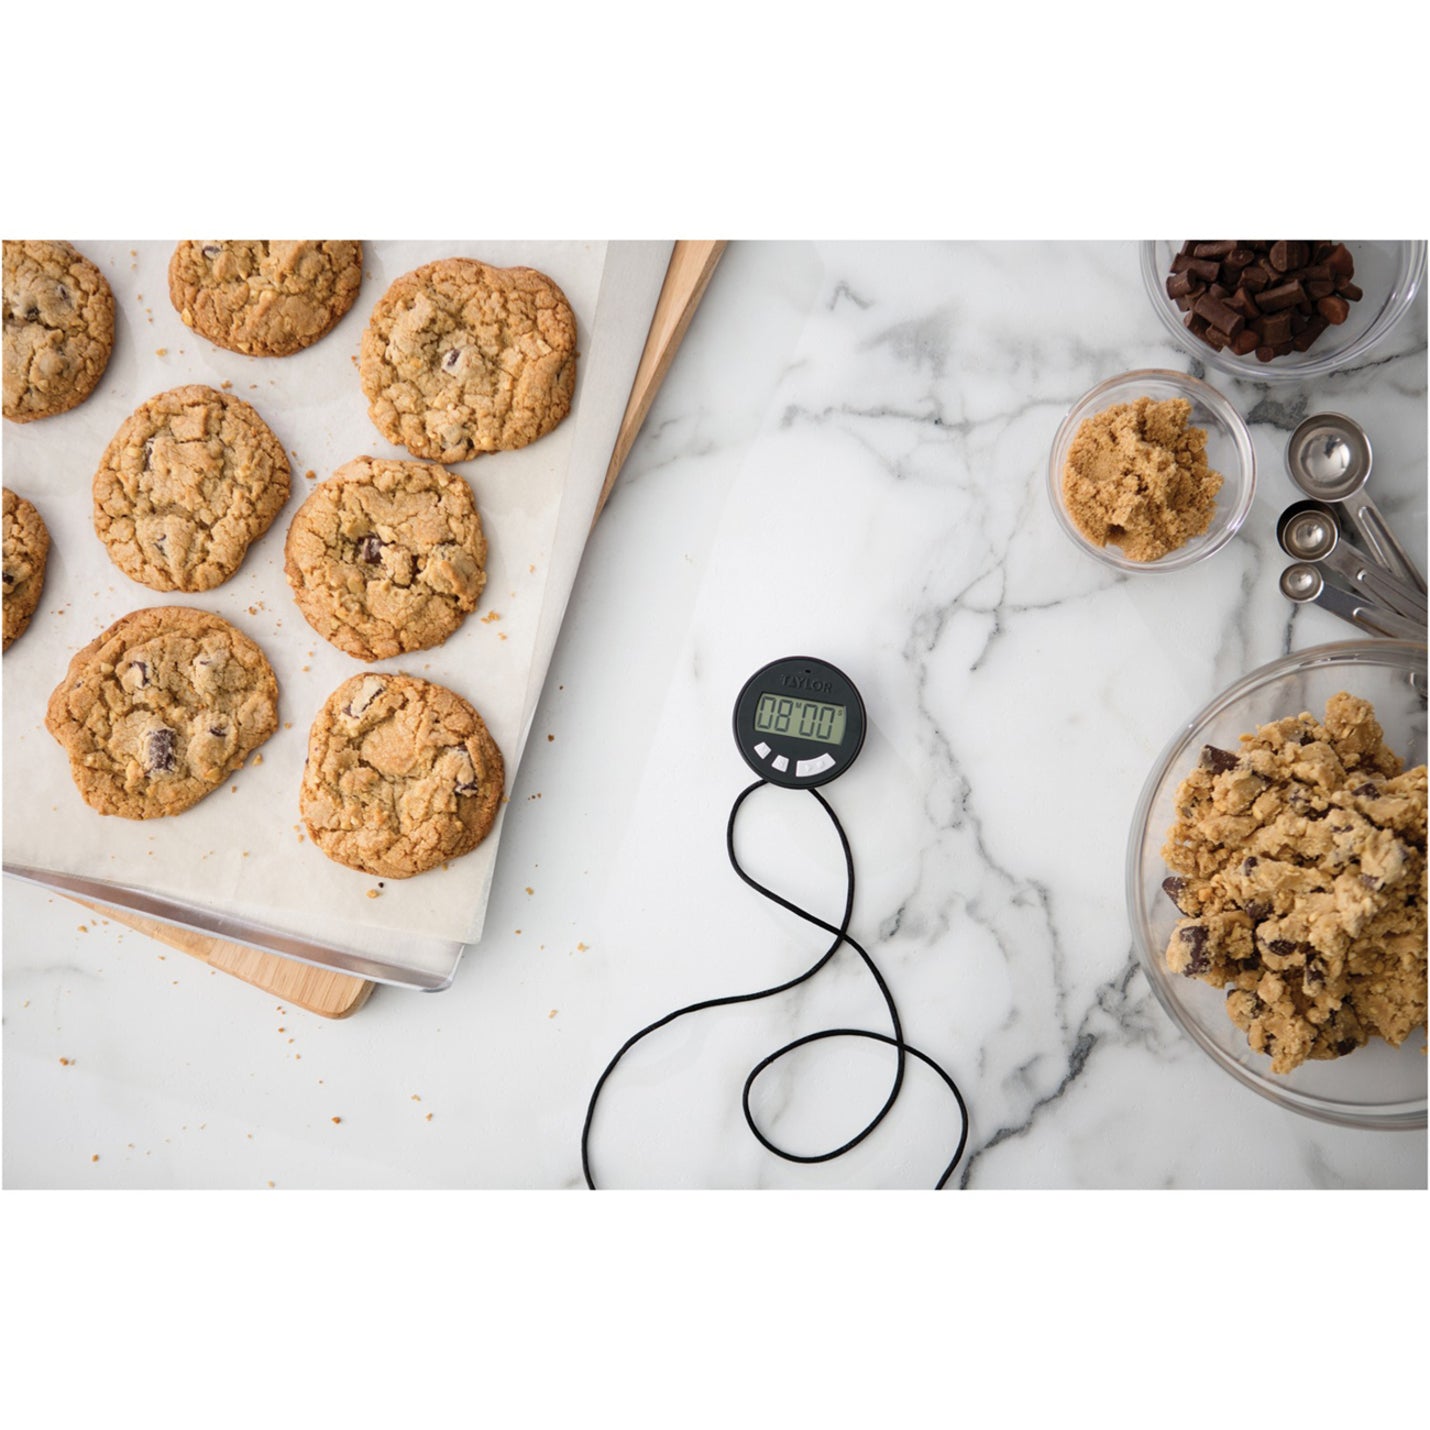 Taylor 5826 Chef's Stopwatch Timer, Digital Timer for Kitchen